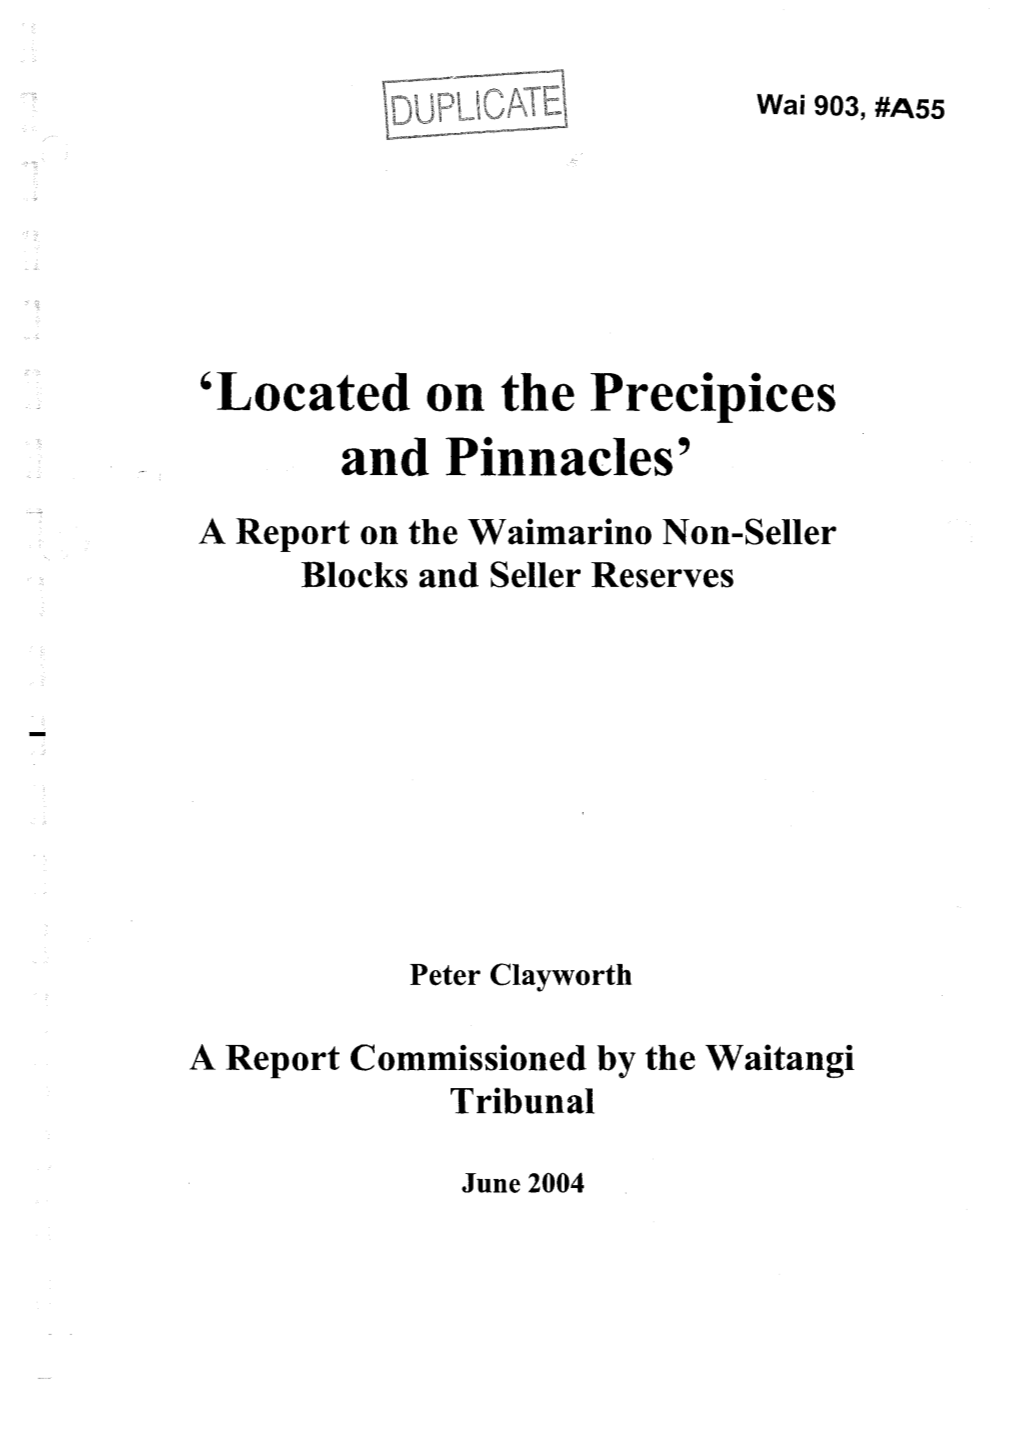 'Located on the Precipices and Pinnacles' a Report on the Waimarino Non-Seller Blocks and Seller Reserves